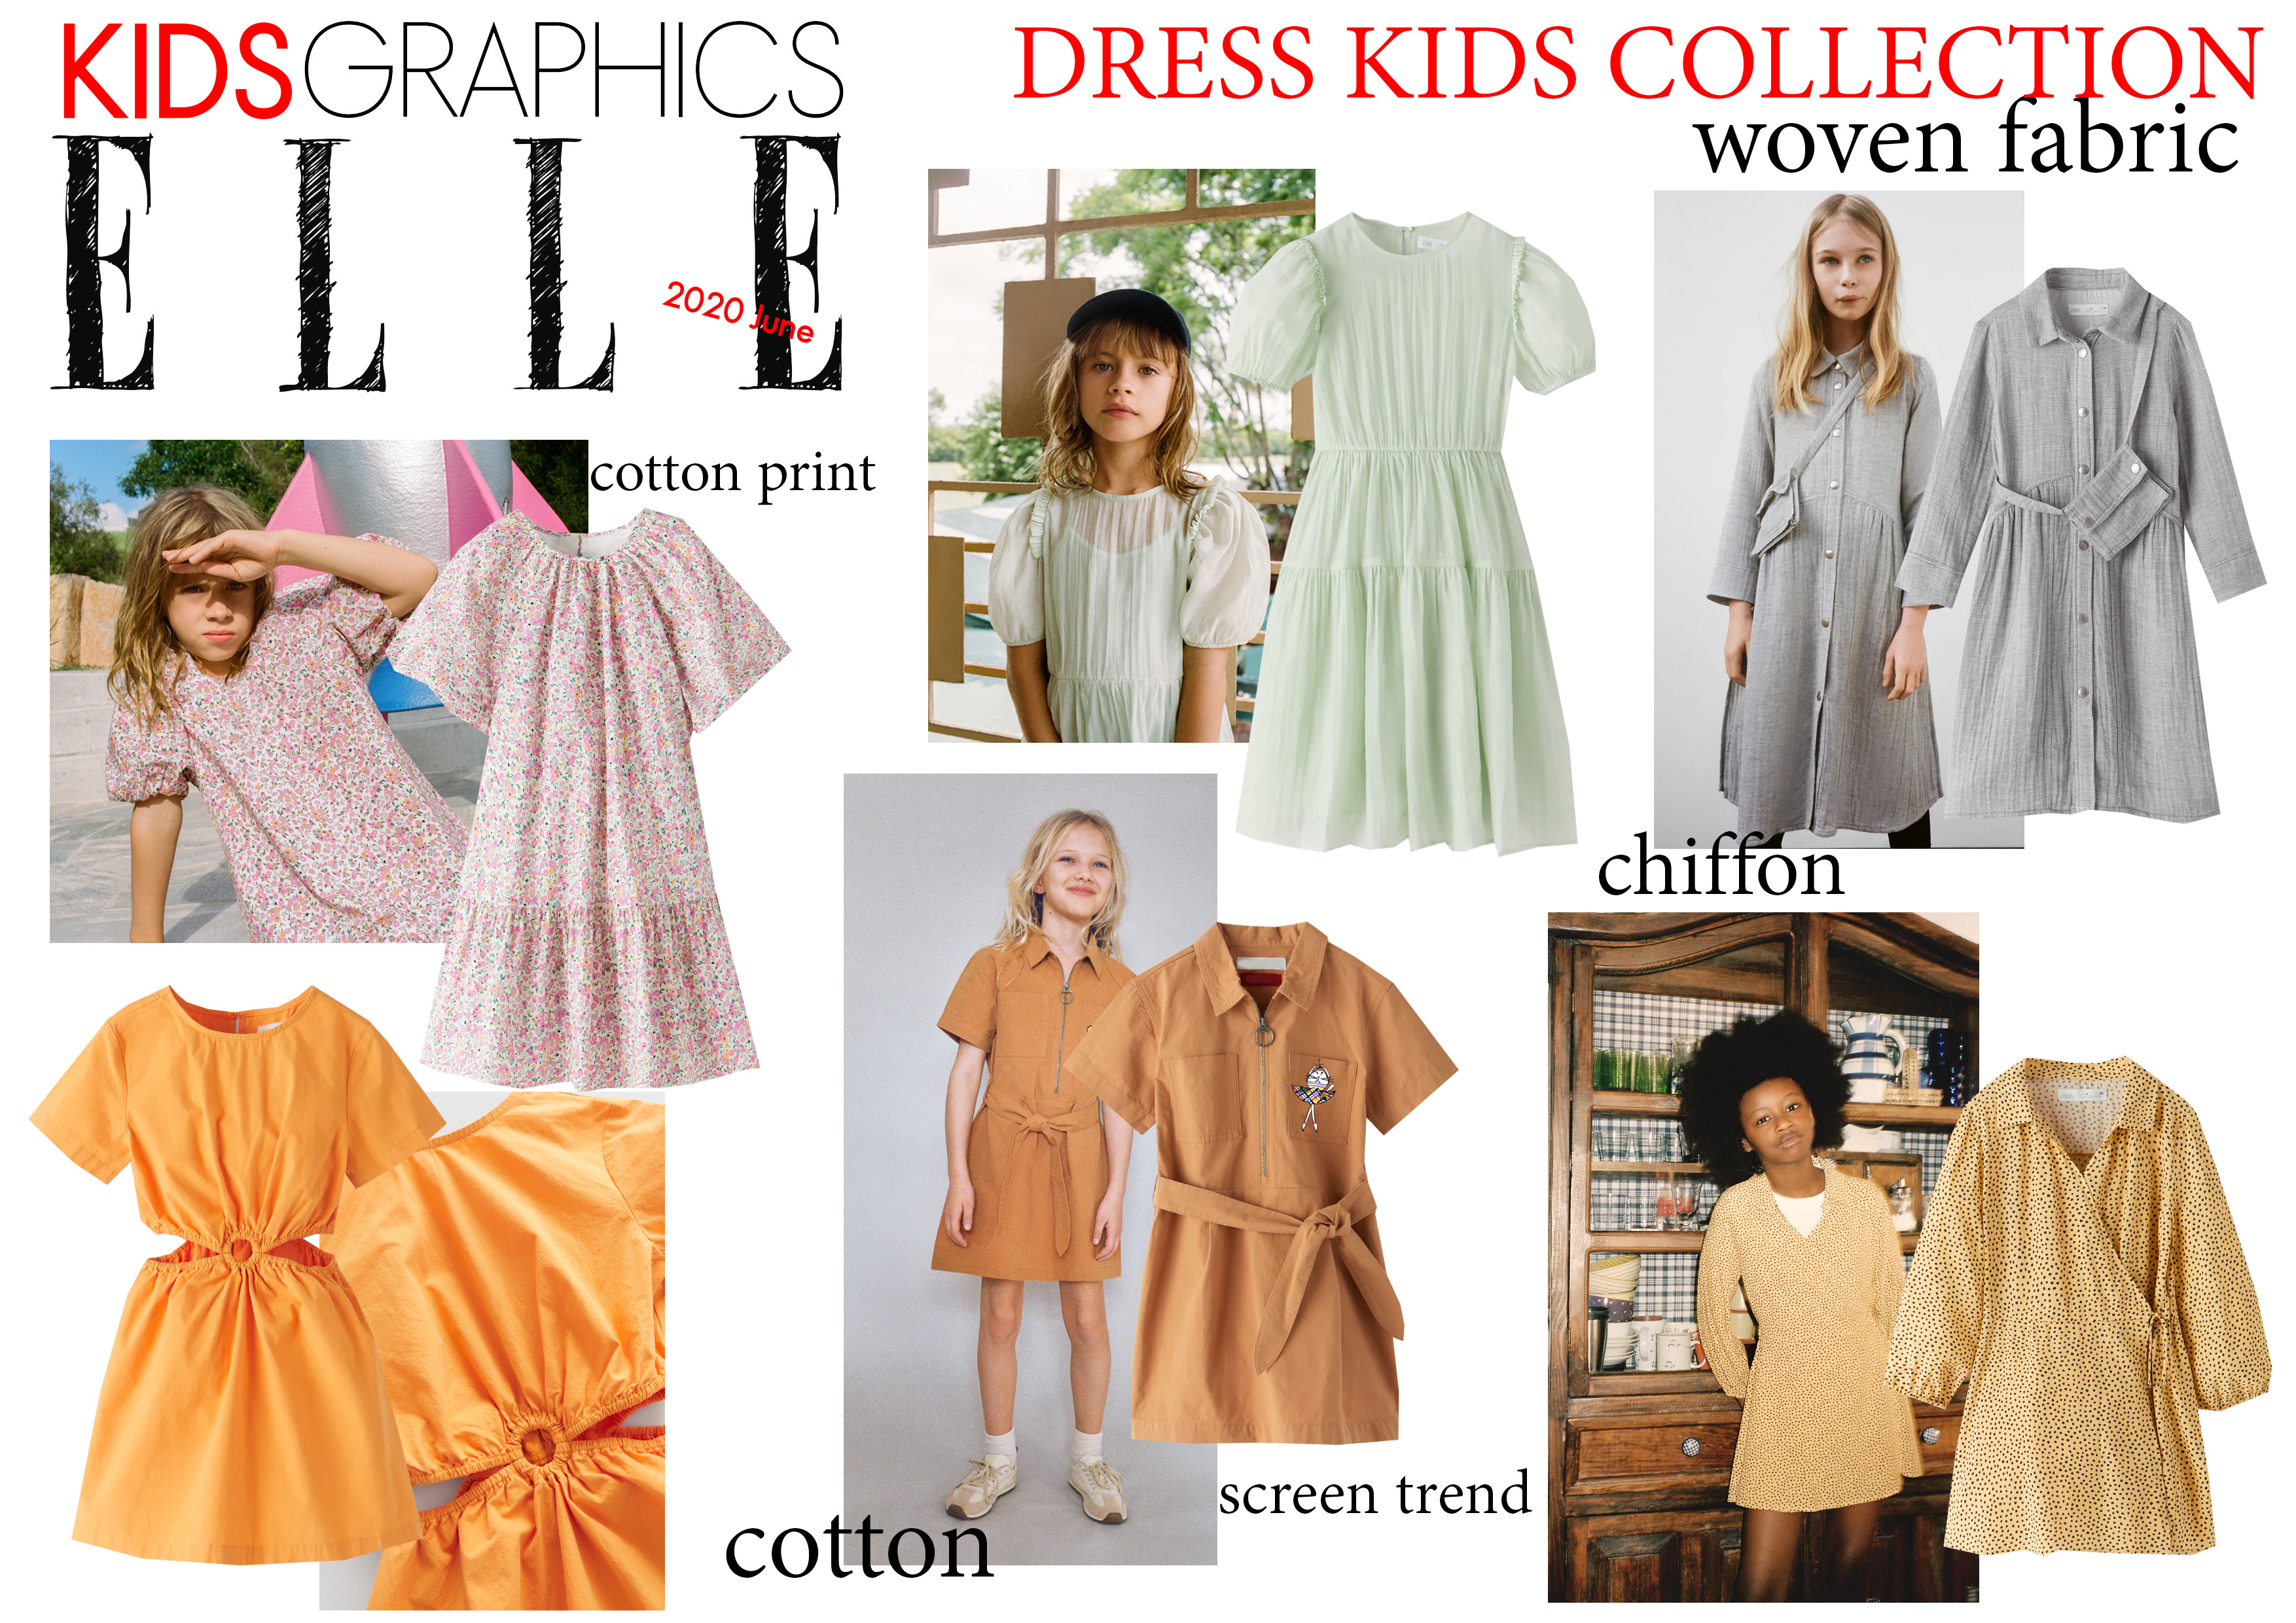 KIDSGRAPHICS DRESS KIDS COLLECT]ON
mre woven fabric

 

SAN

NEY

creen trend